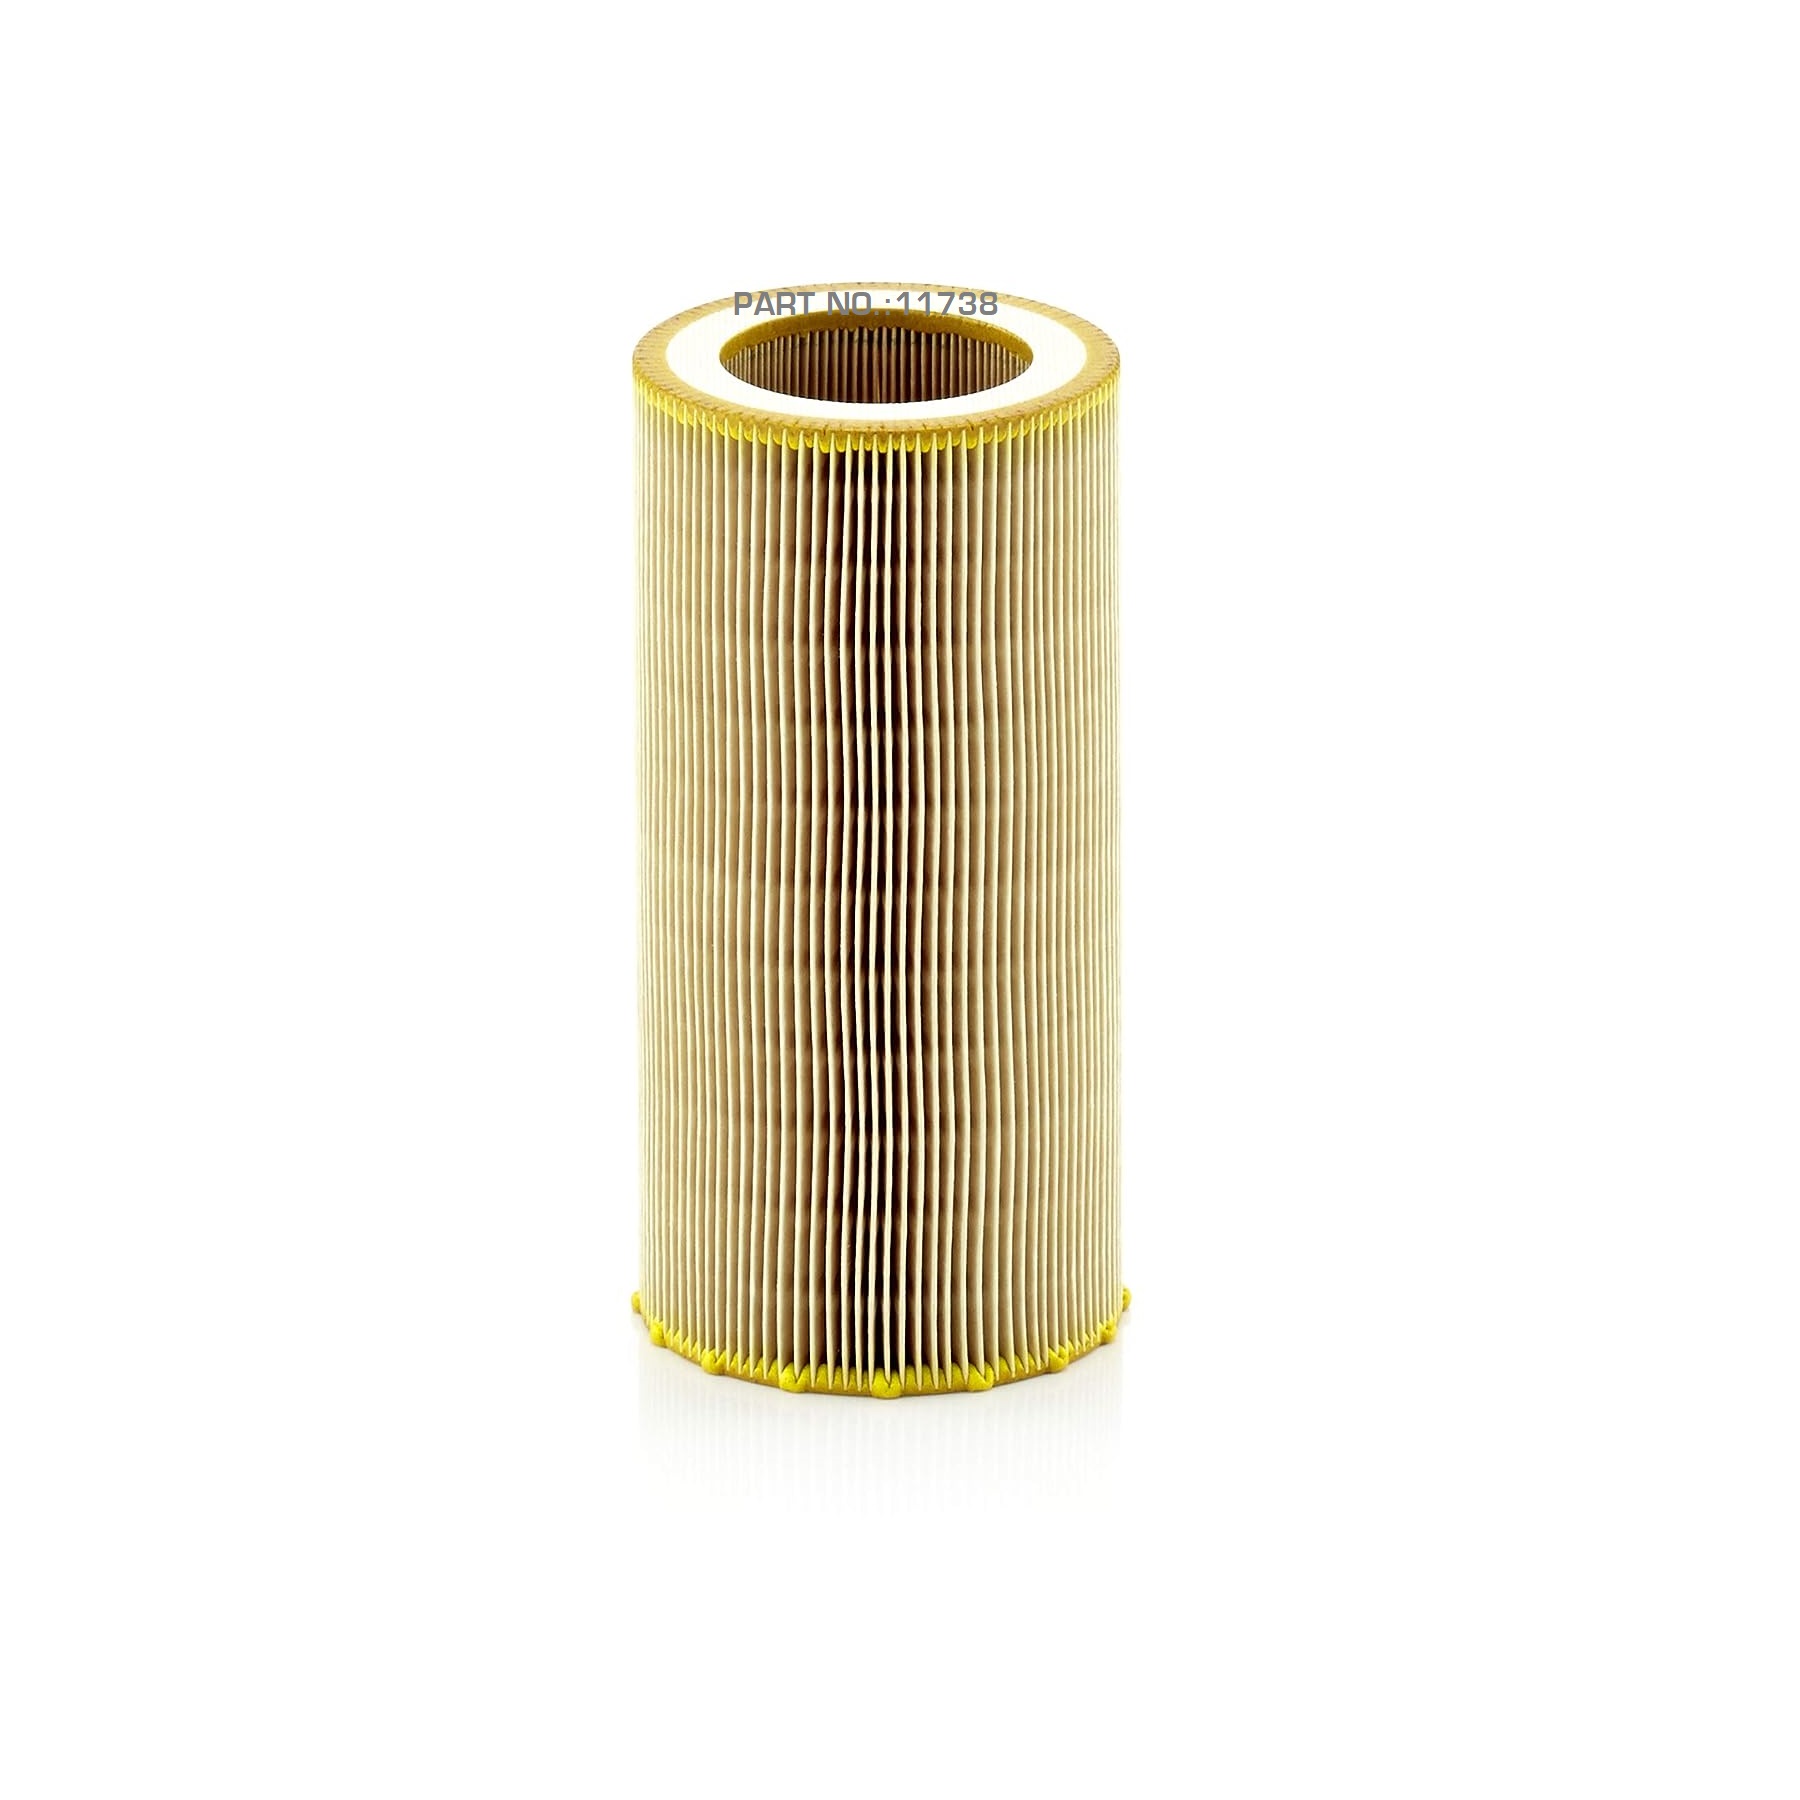 11738 AIR FILTER FOR COMPRESSORS